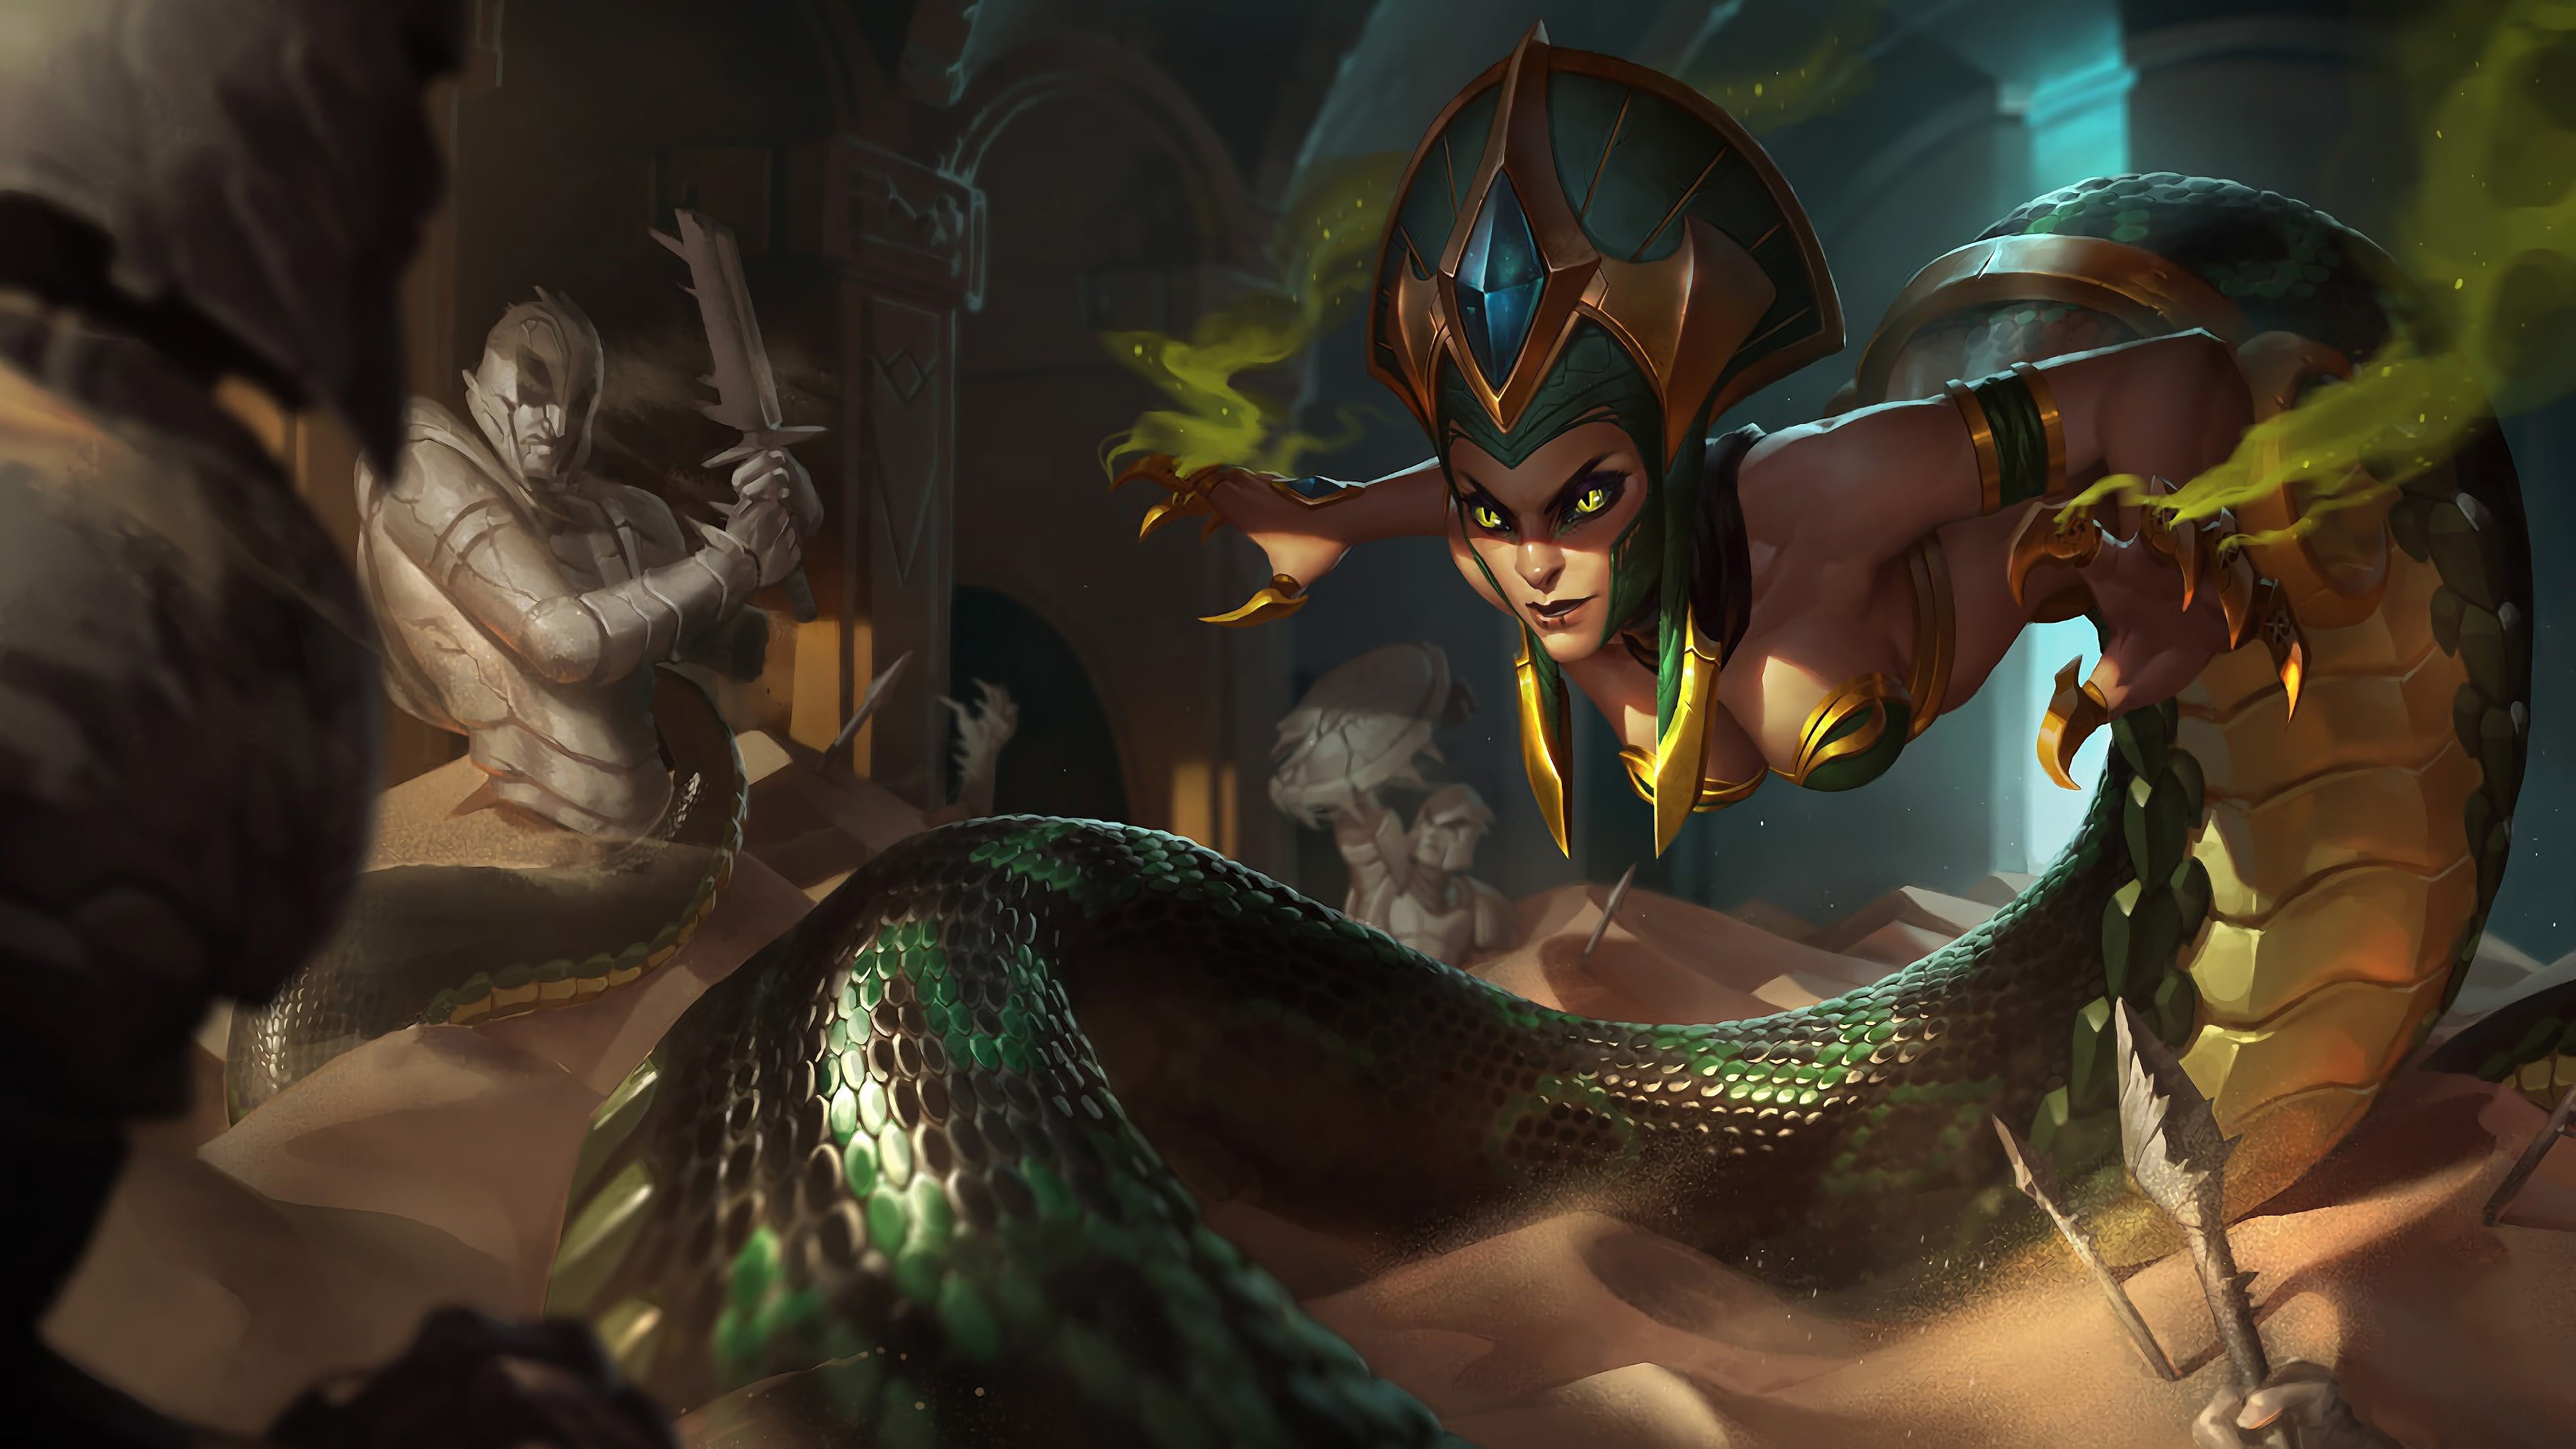 Sand, The game, Snake, Sword, Eyes, Claws, Shield, Cassiopeia